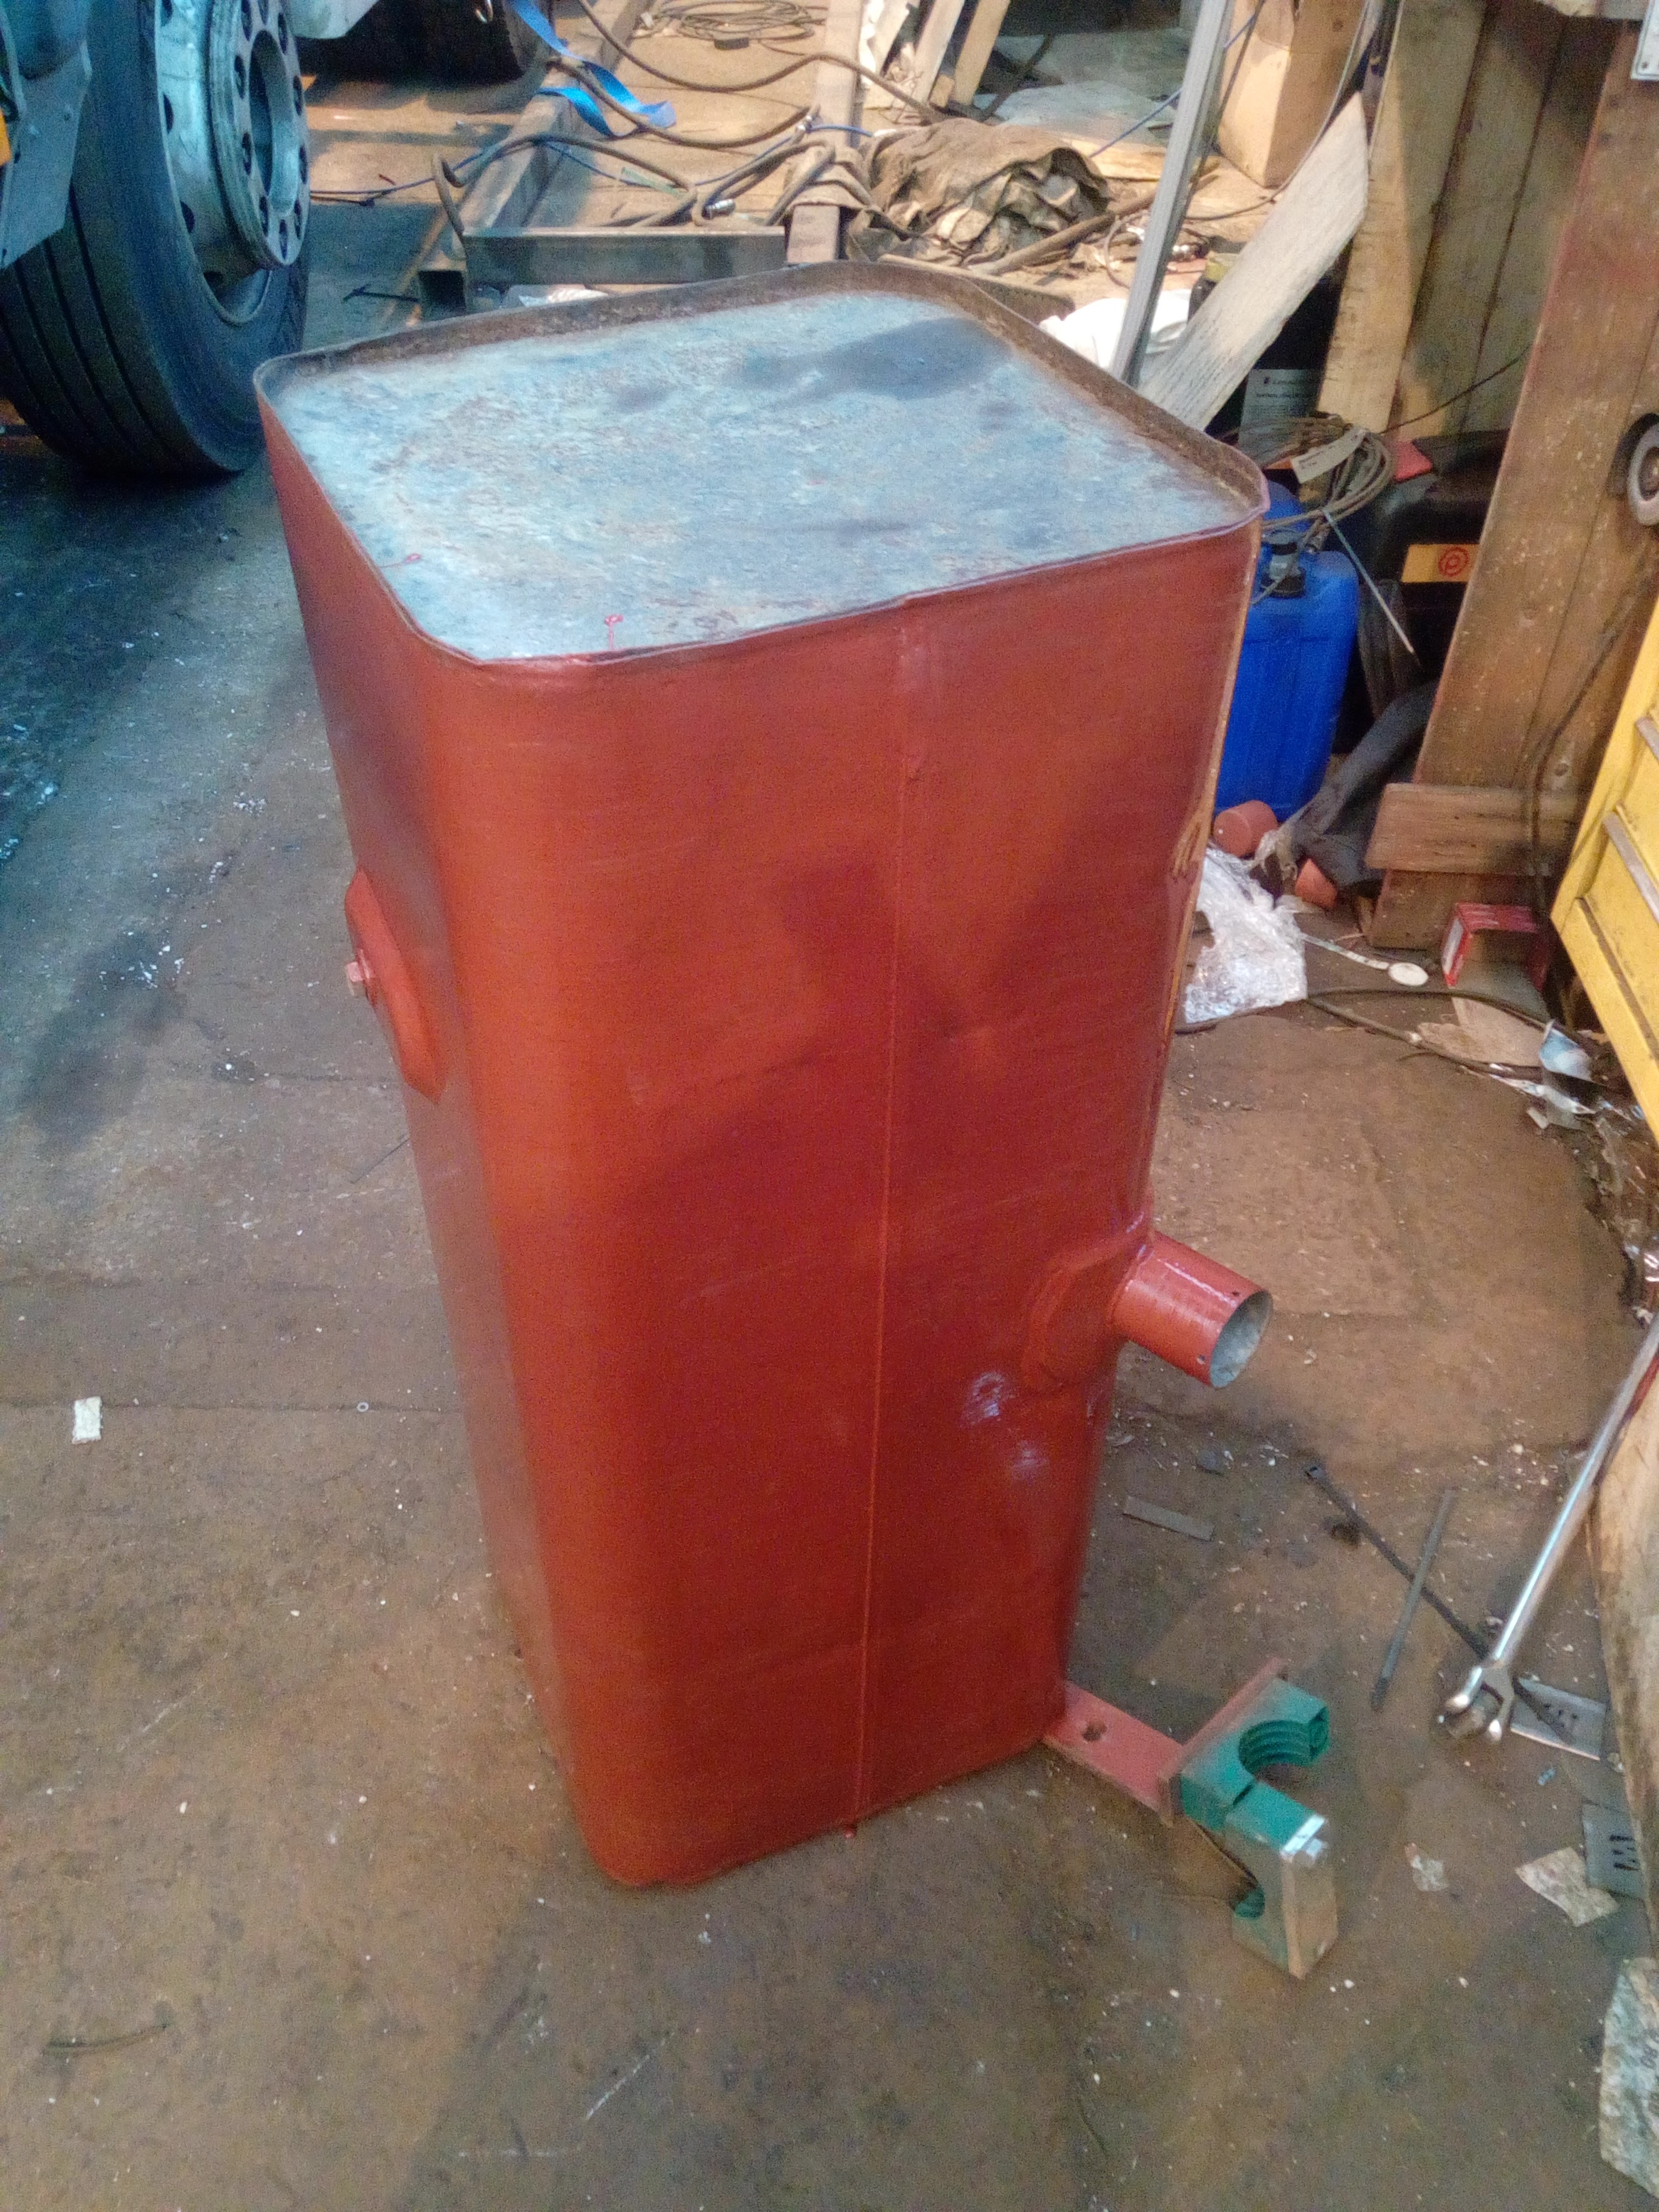 A large rectangular fuel tank, standing on end in a cluttered
workshop, almost all painted with a reddish-brown primer paint. The
top-most surface, one of the end plates, has not yet been cleaned and
painted.